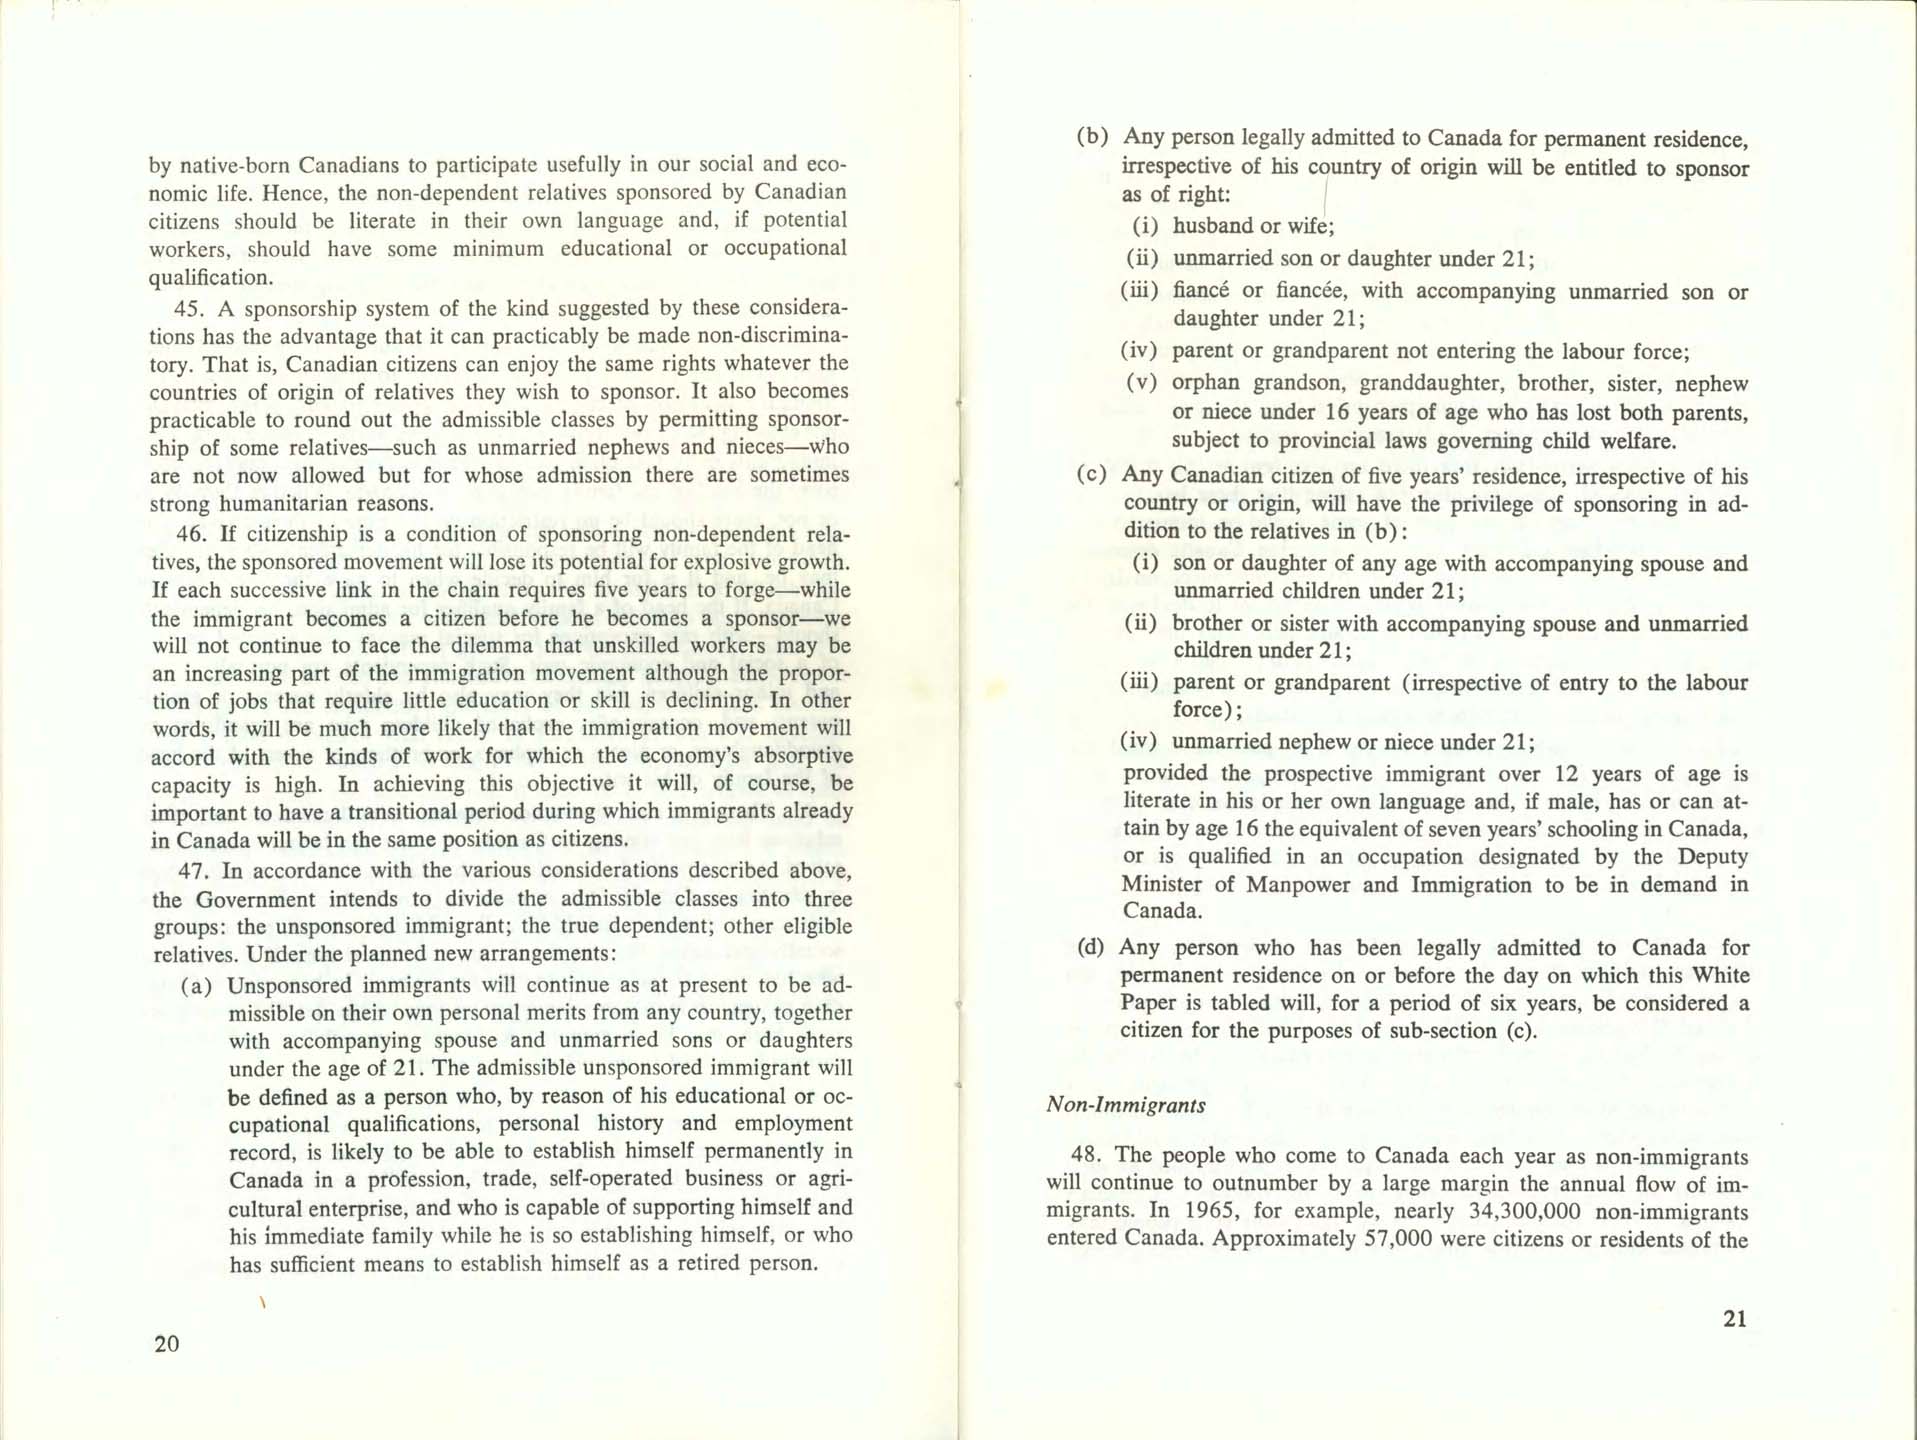 White Paper on Immigration, 1966 | Pier 21